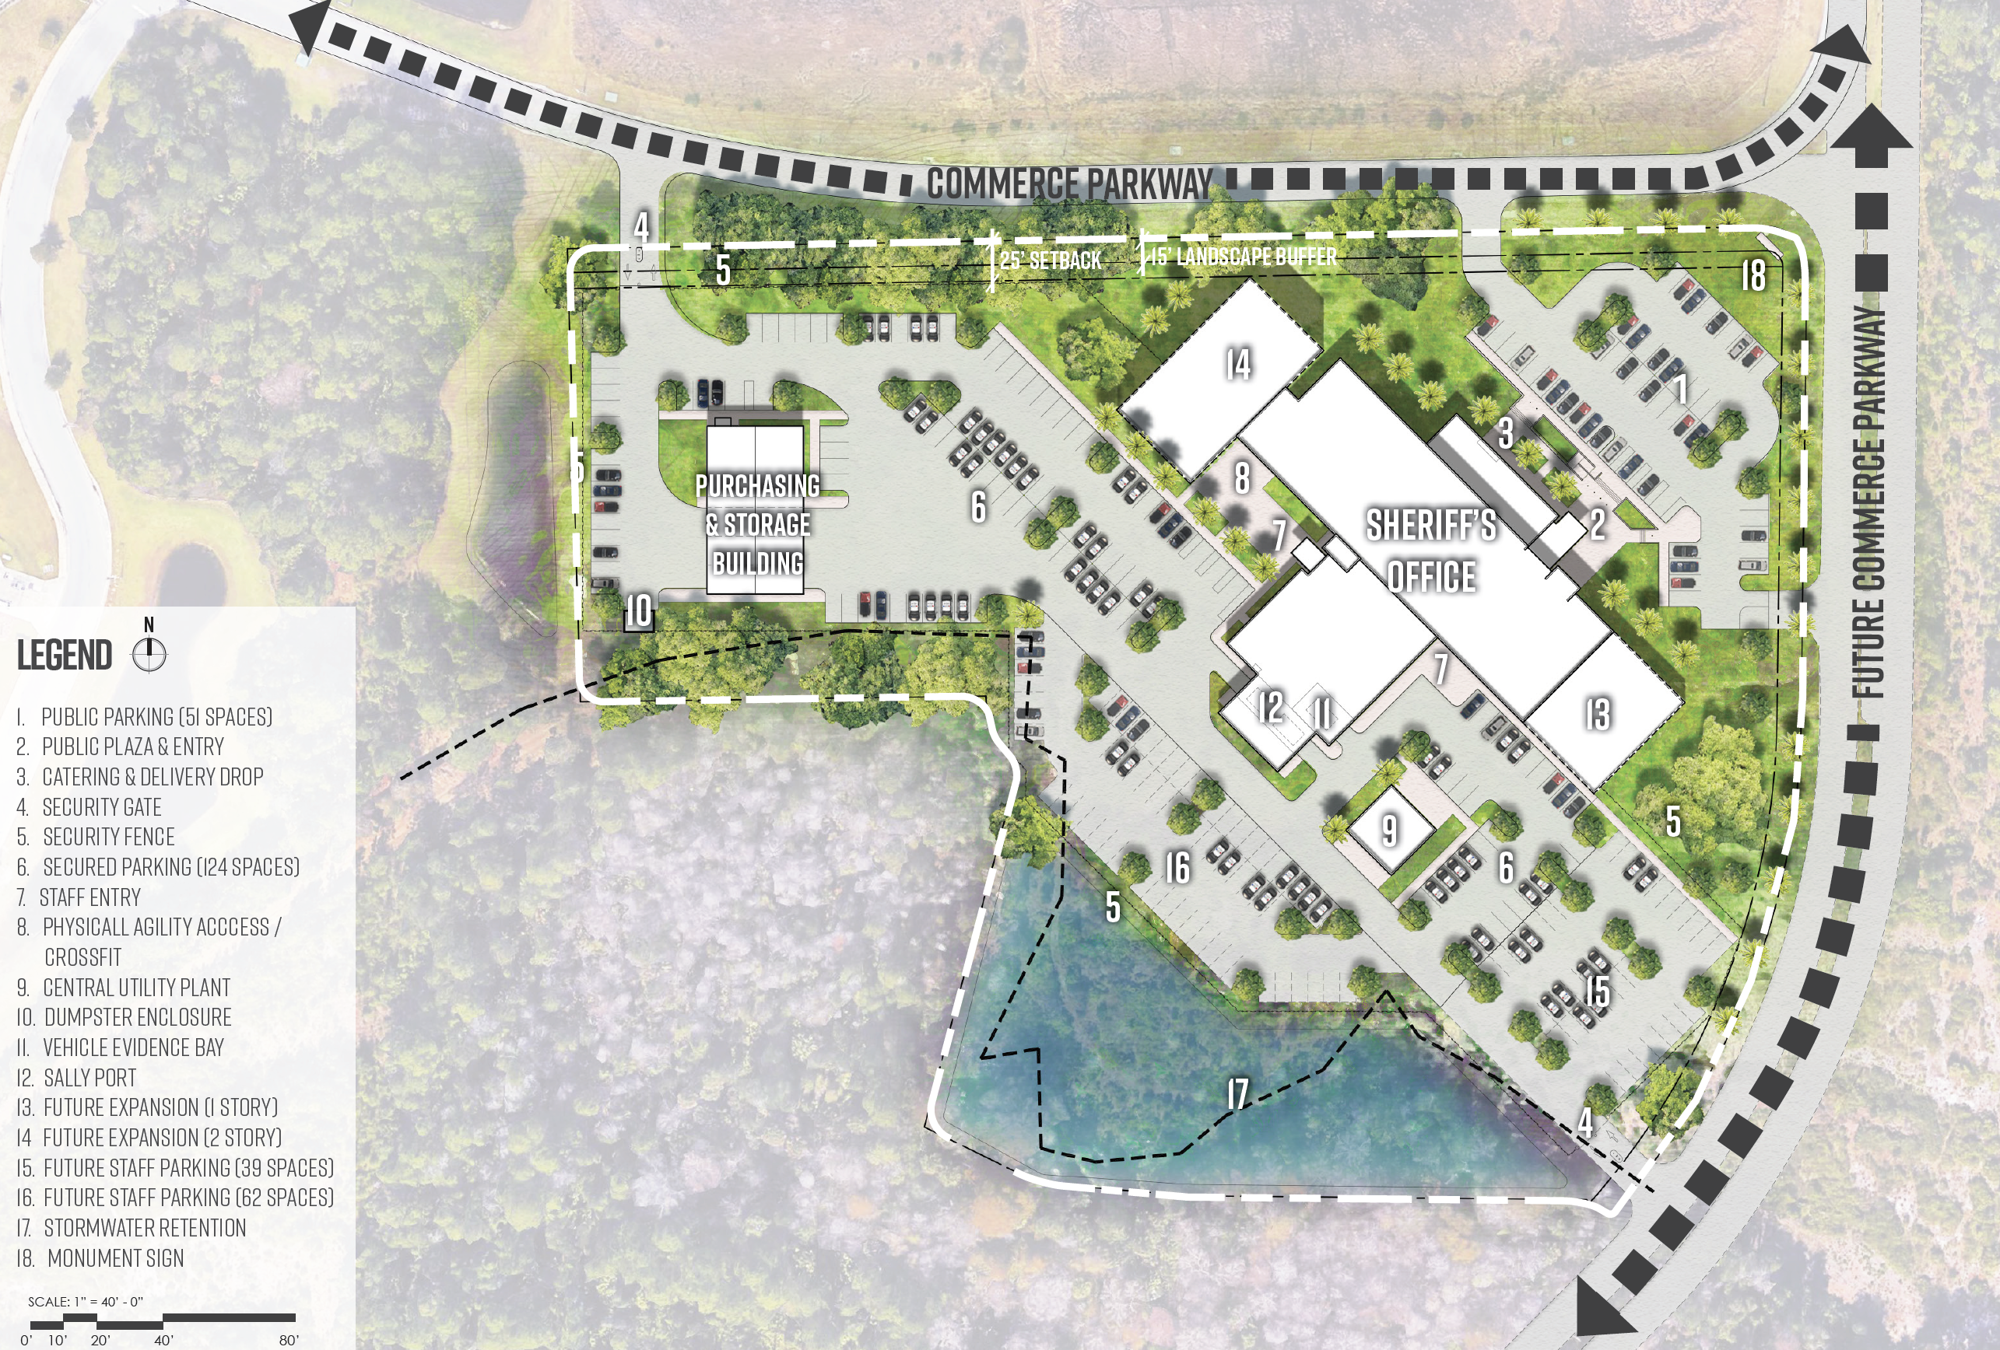 Site plan by Architects Design Group. Image courtesy of the FCSO